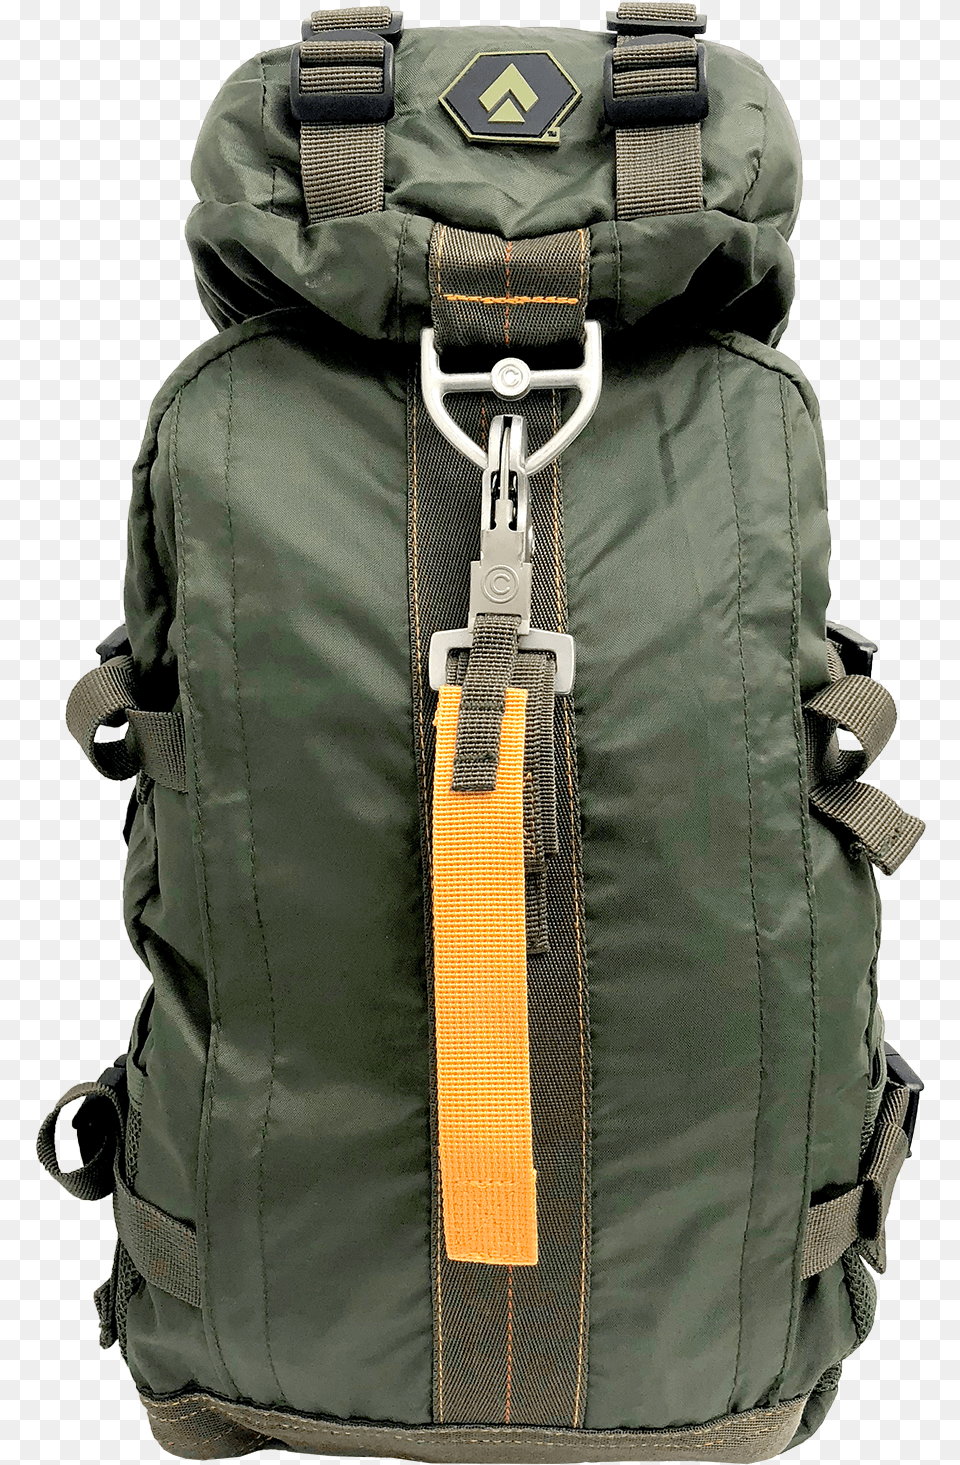 Opsgear Parachute Backpackclass Parachute In A Backpack, Bag, Clothing, Coat, Jacket Free Png